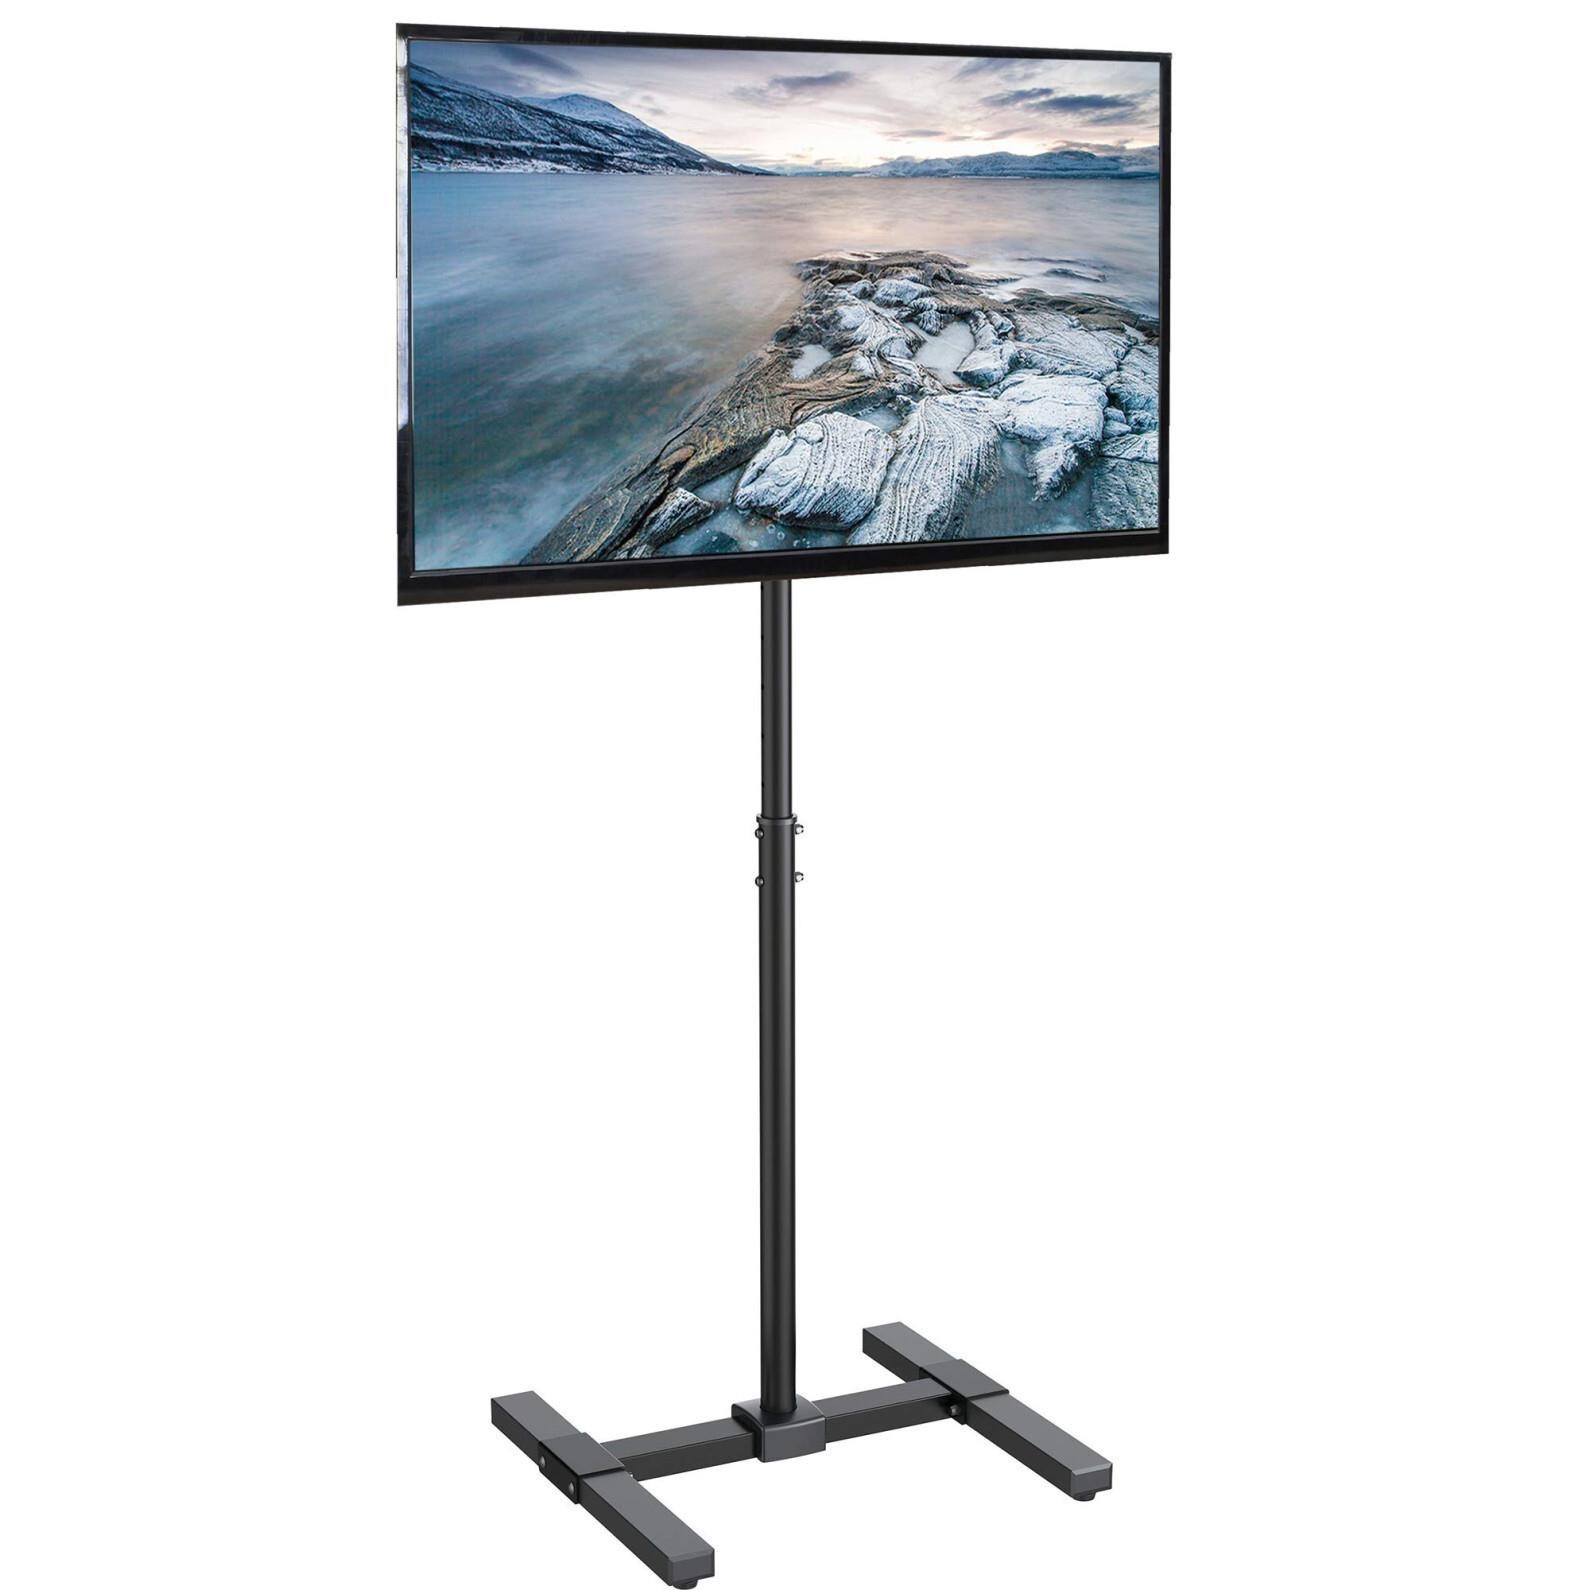 VIVO TV Floor Stand for 13 to 50 inch Flat Panel